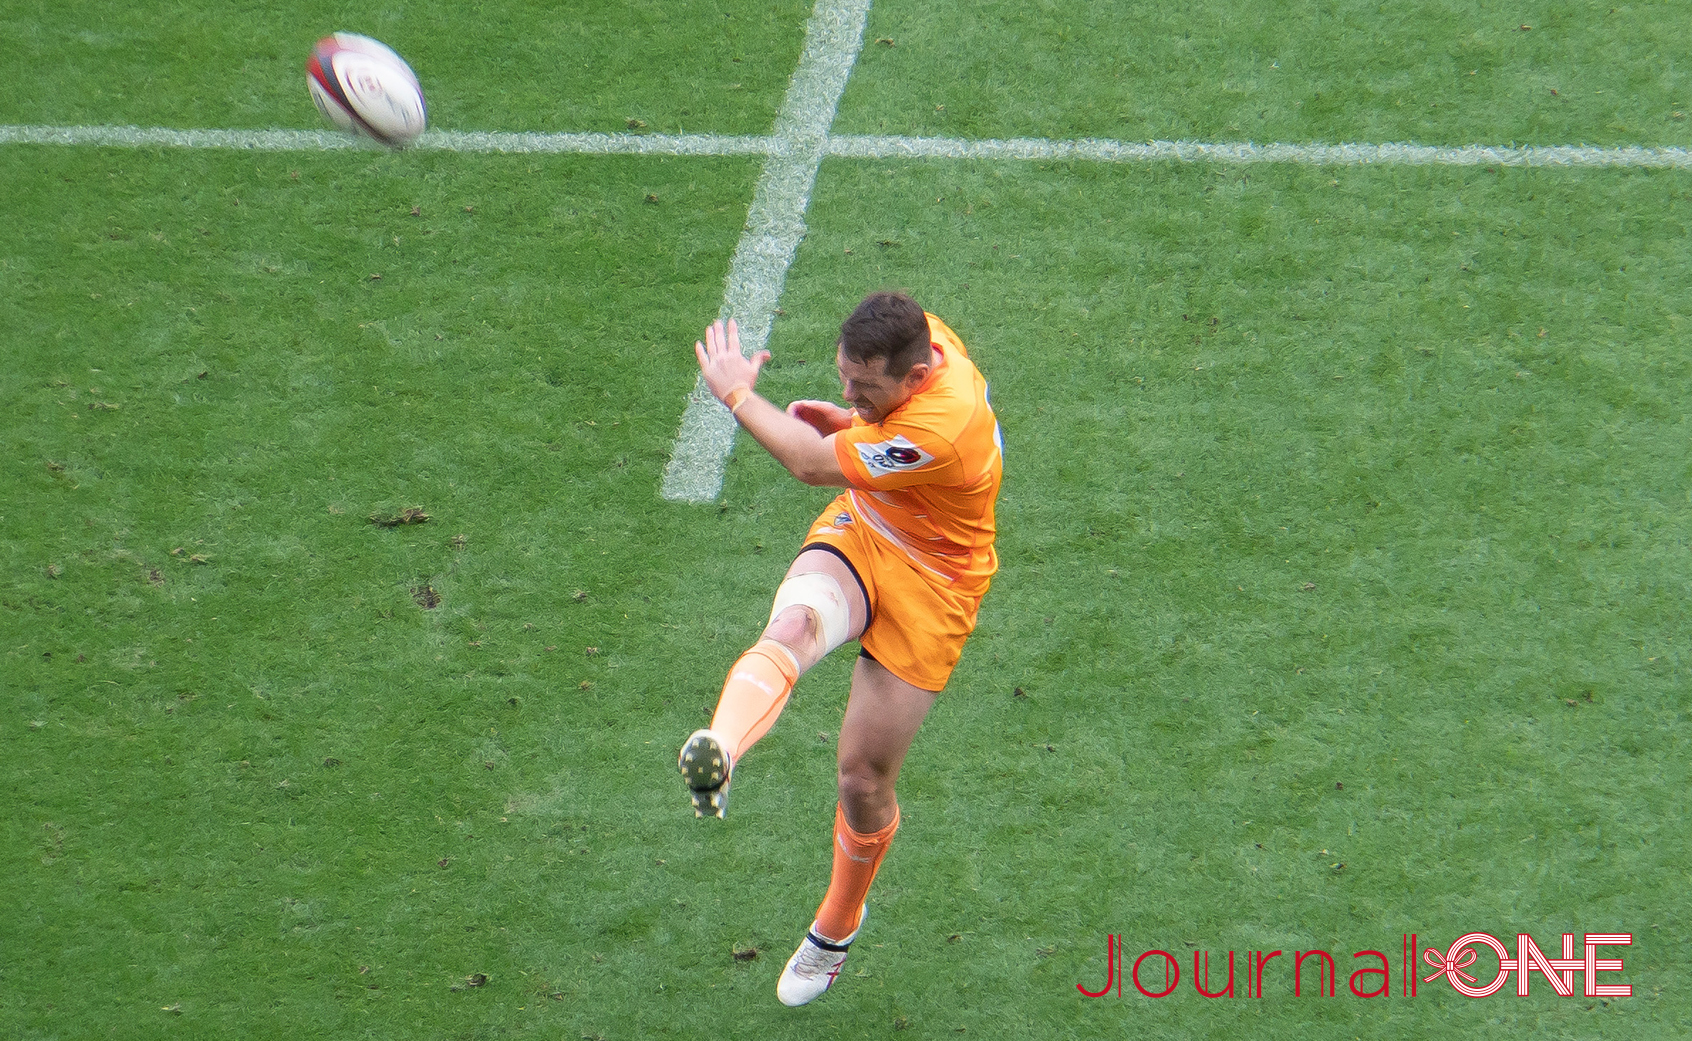 Japan Rugby League One final match,The moment Bernard Foley (Australianational rugby union team) kicked the ball out, the payoff was set. ; Photo by Journal-ONE